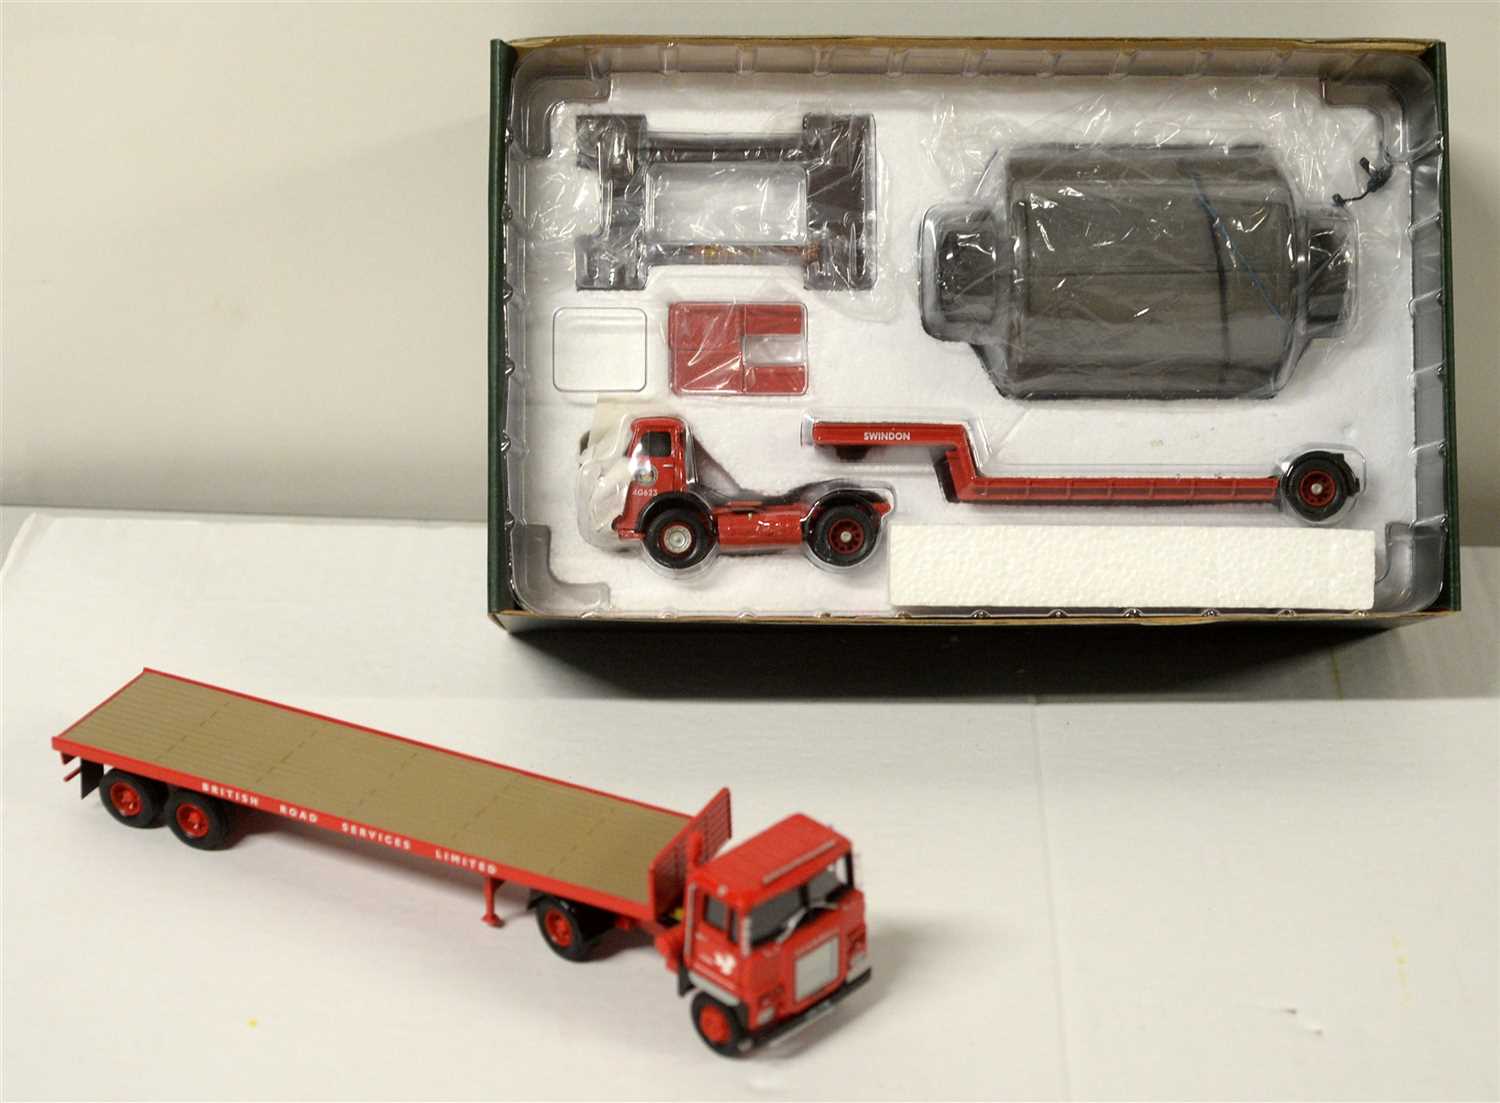 Lot 1270 - Limited edition die-cast model vehicle.